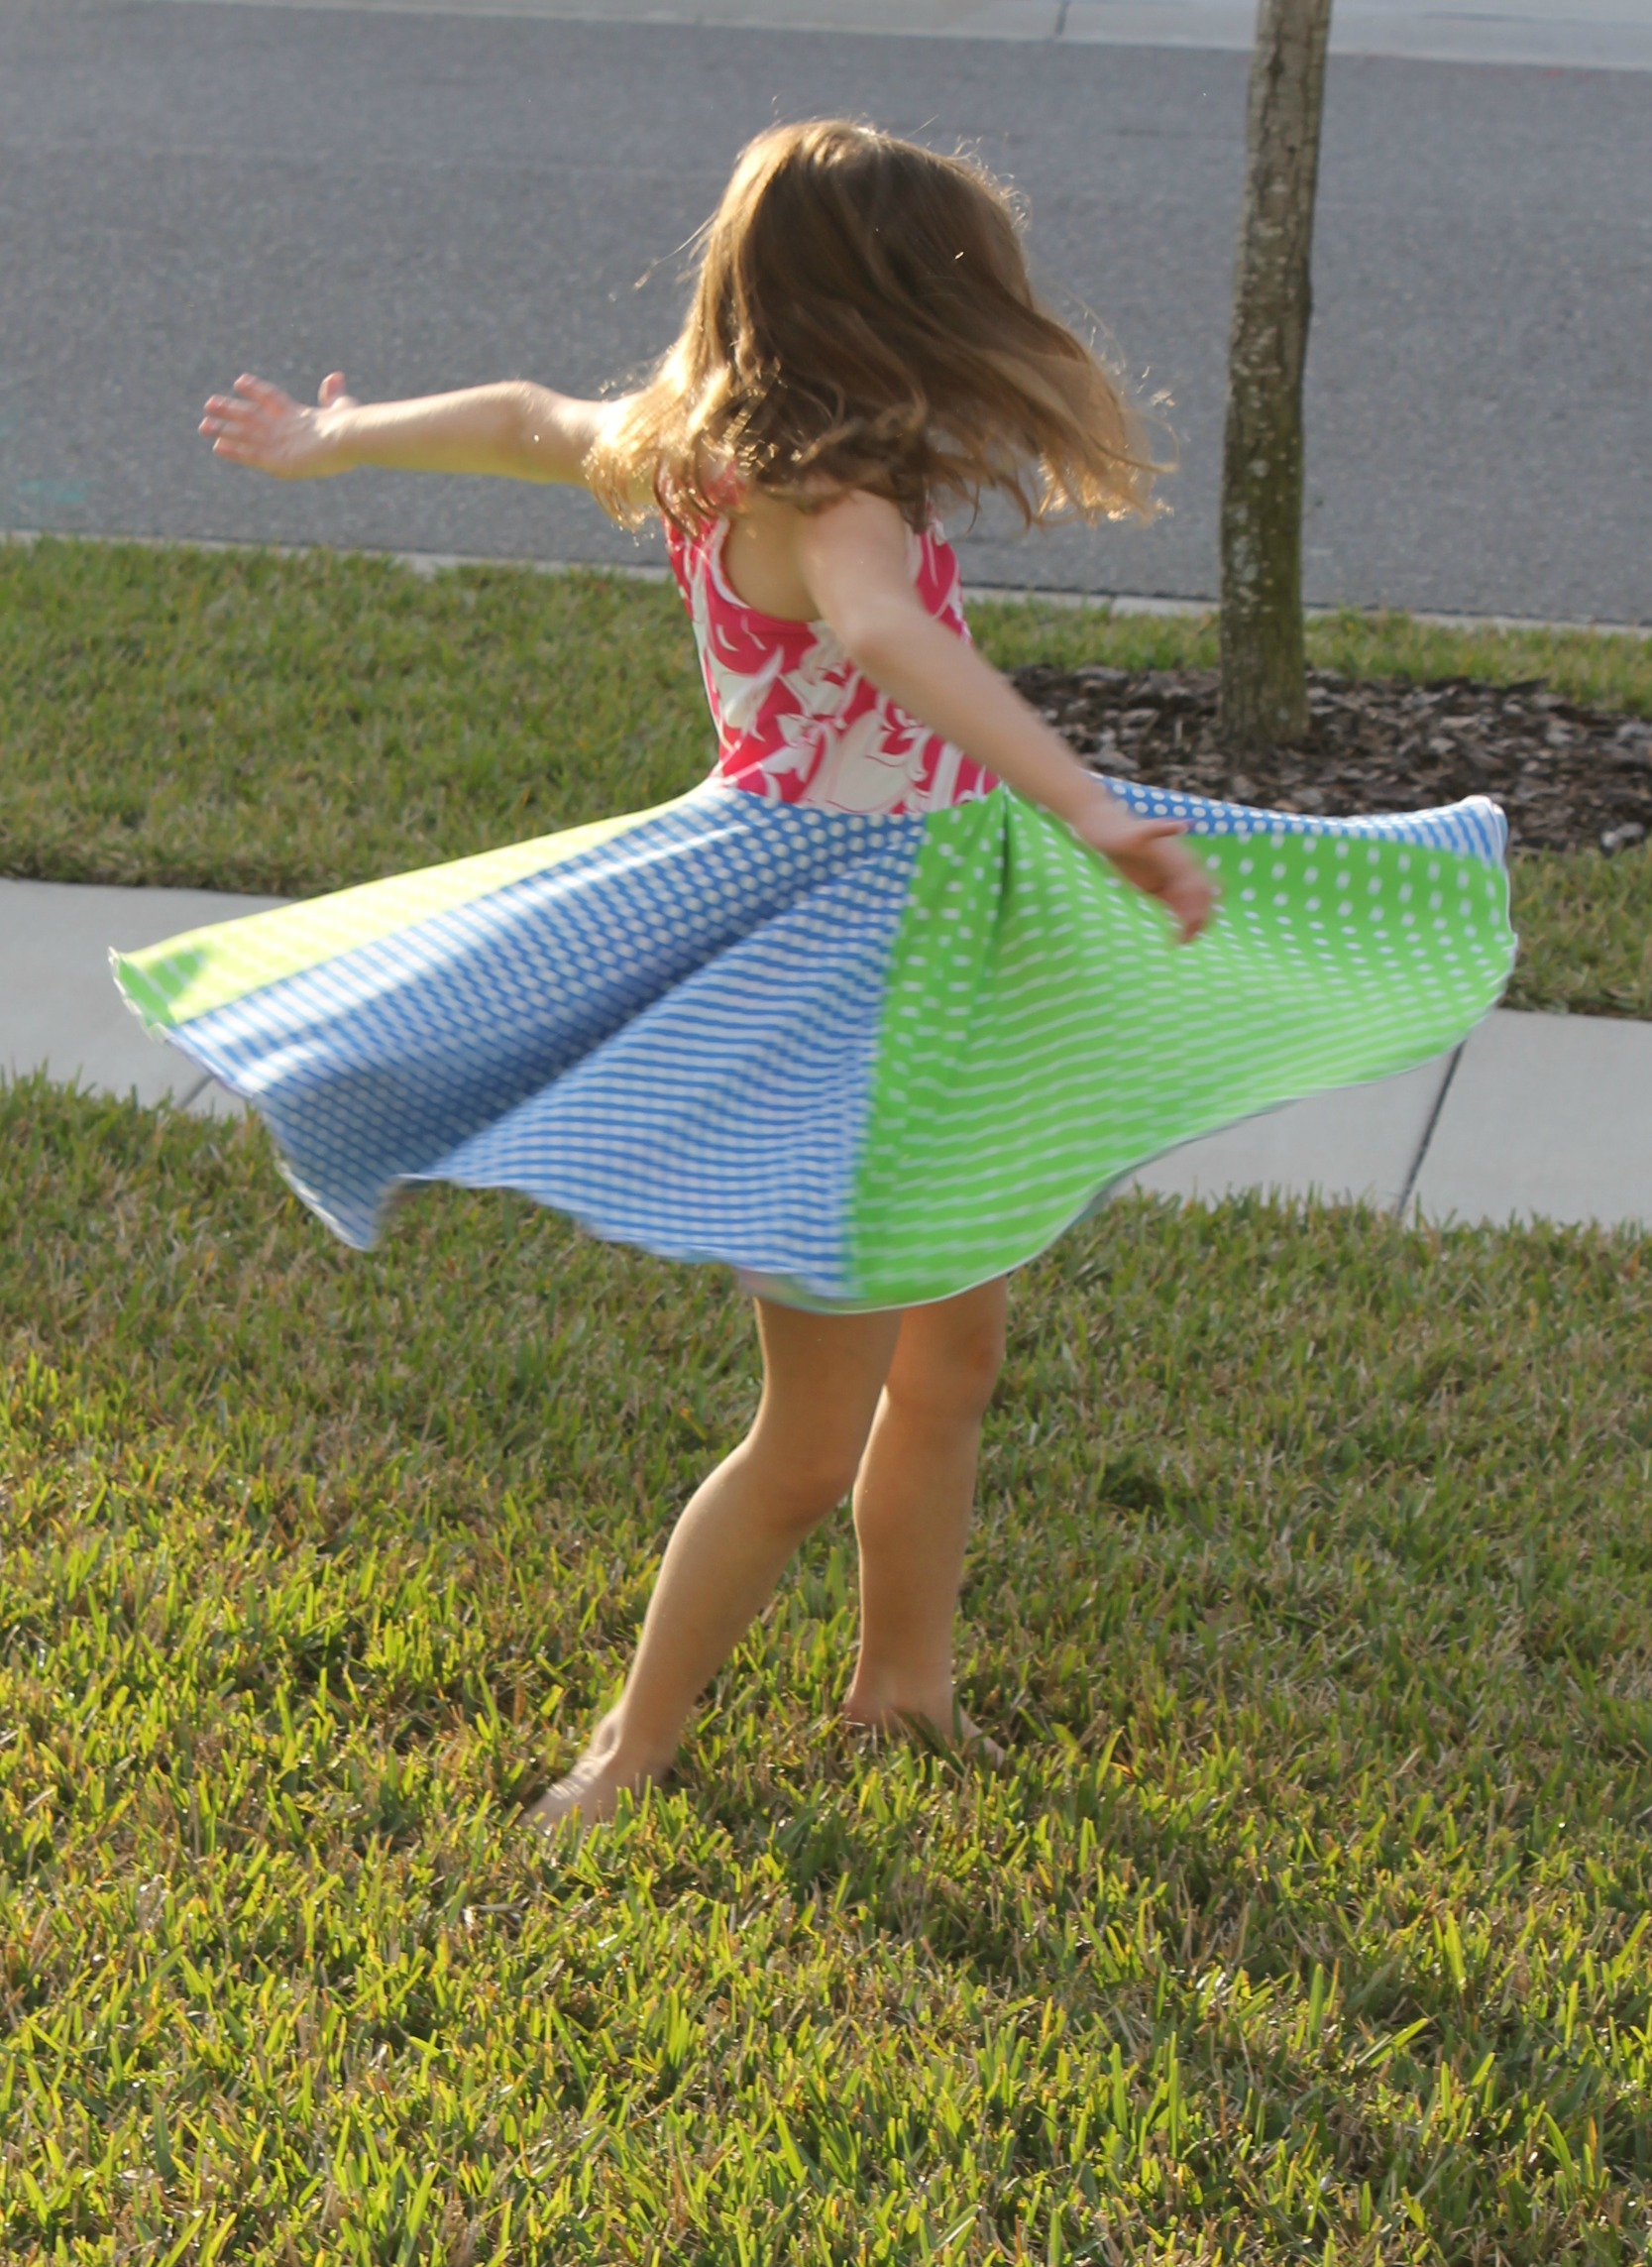 I took her outside a few days later for some twirling photos. 